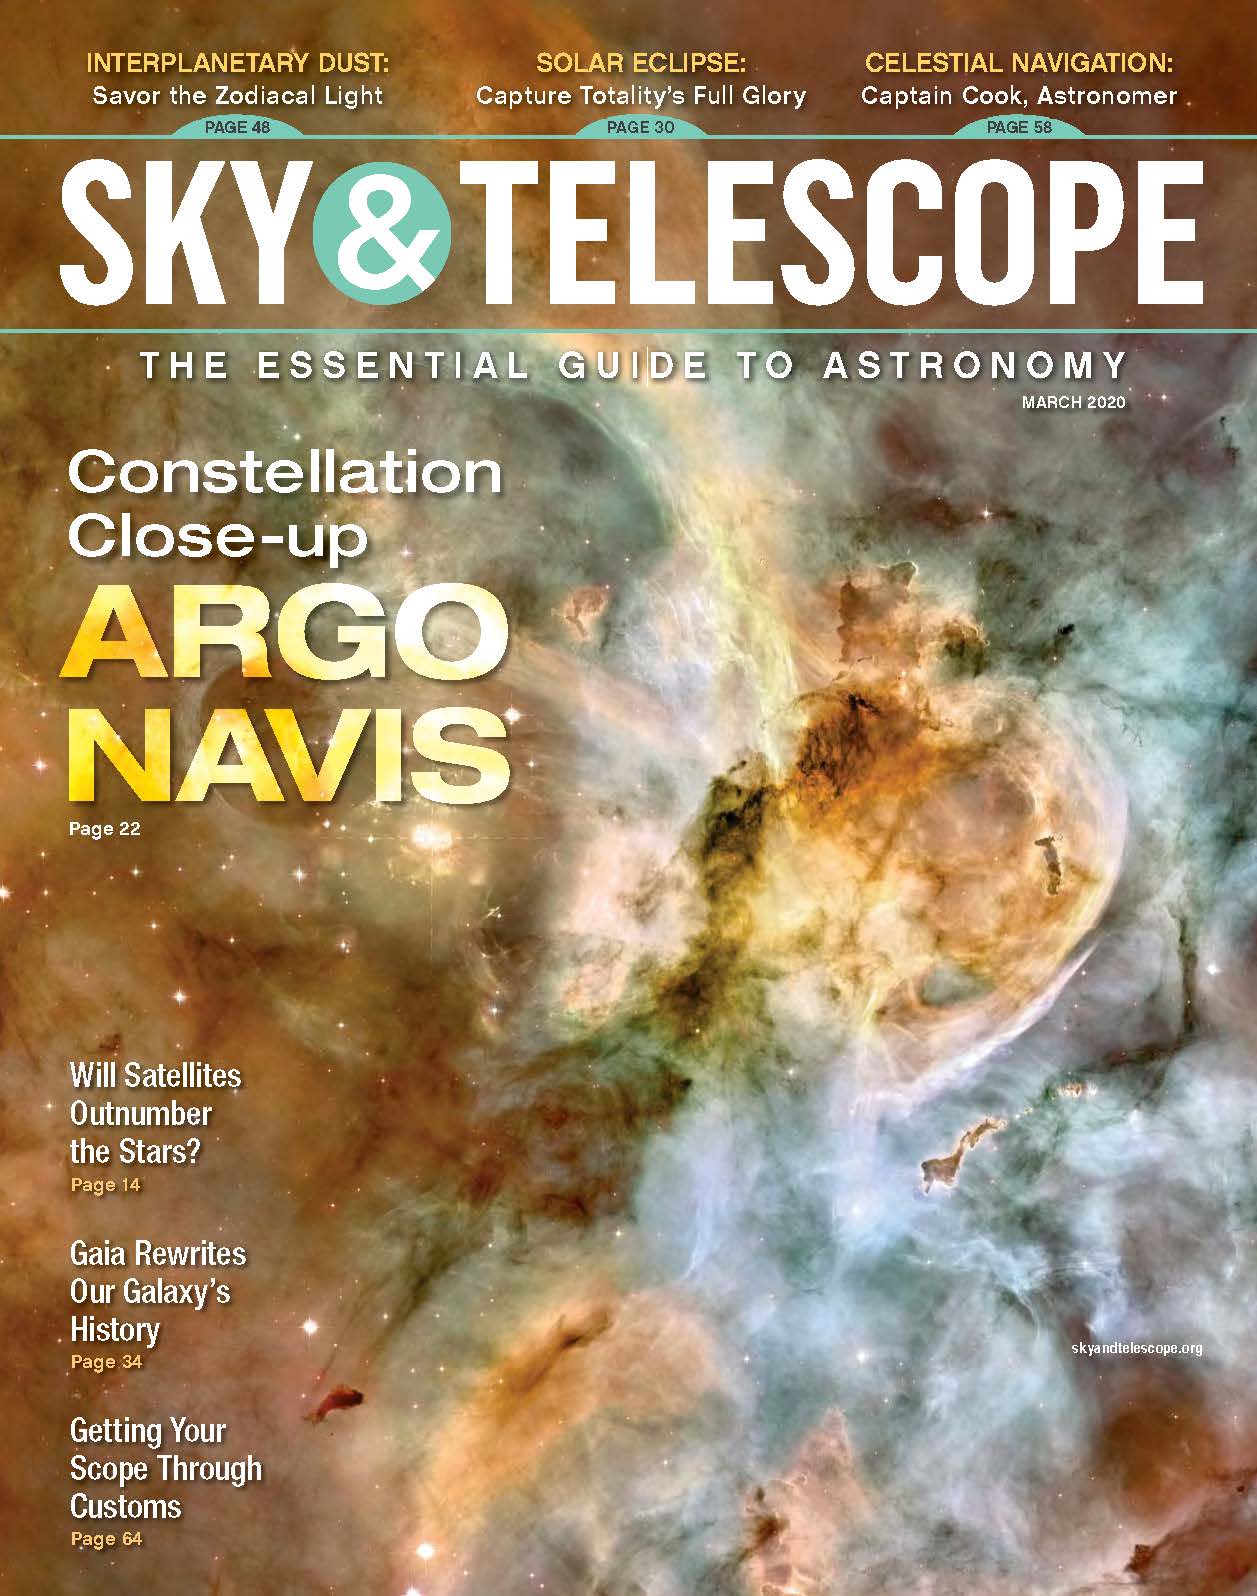 inside-sky-telescope-s-march-2020-issue-american-astronomical-society